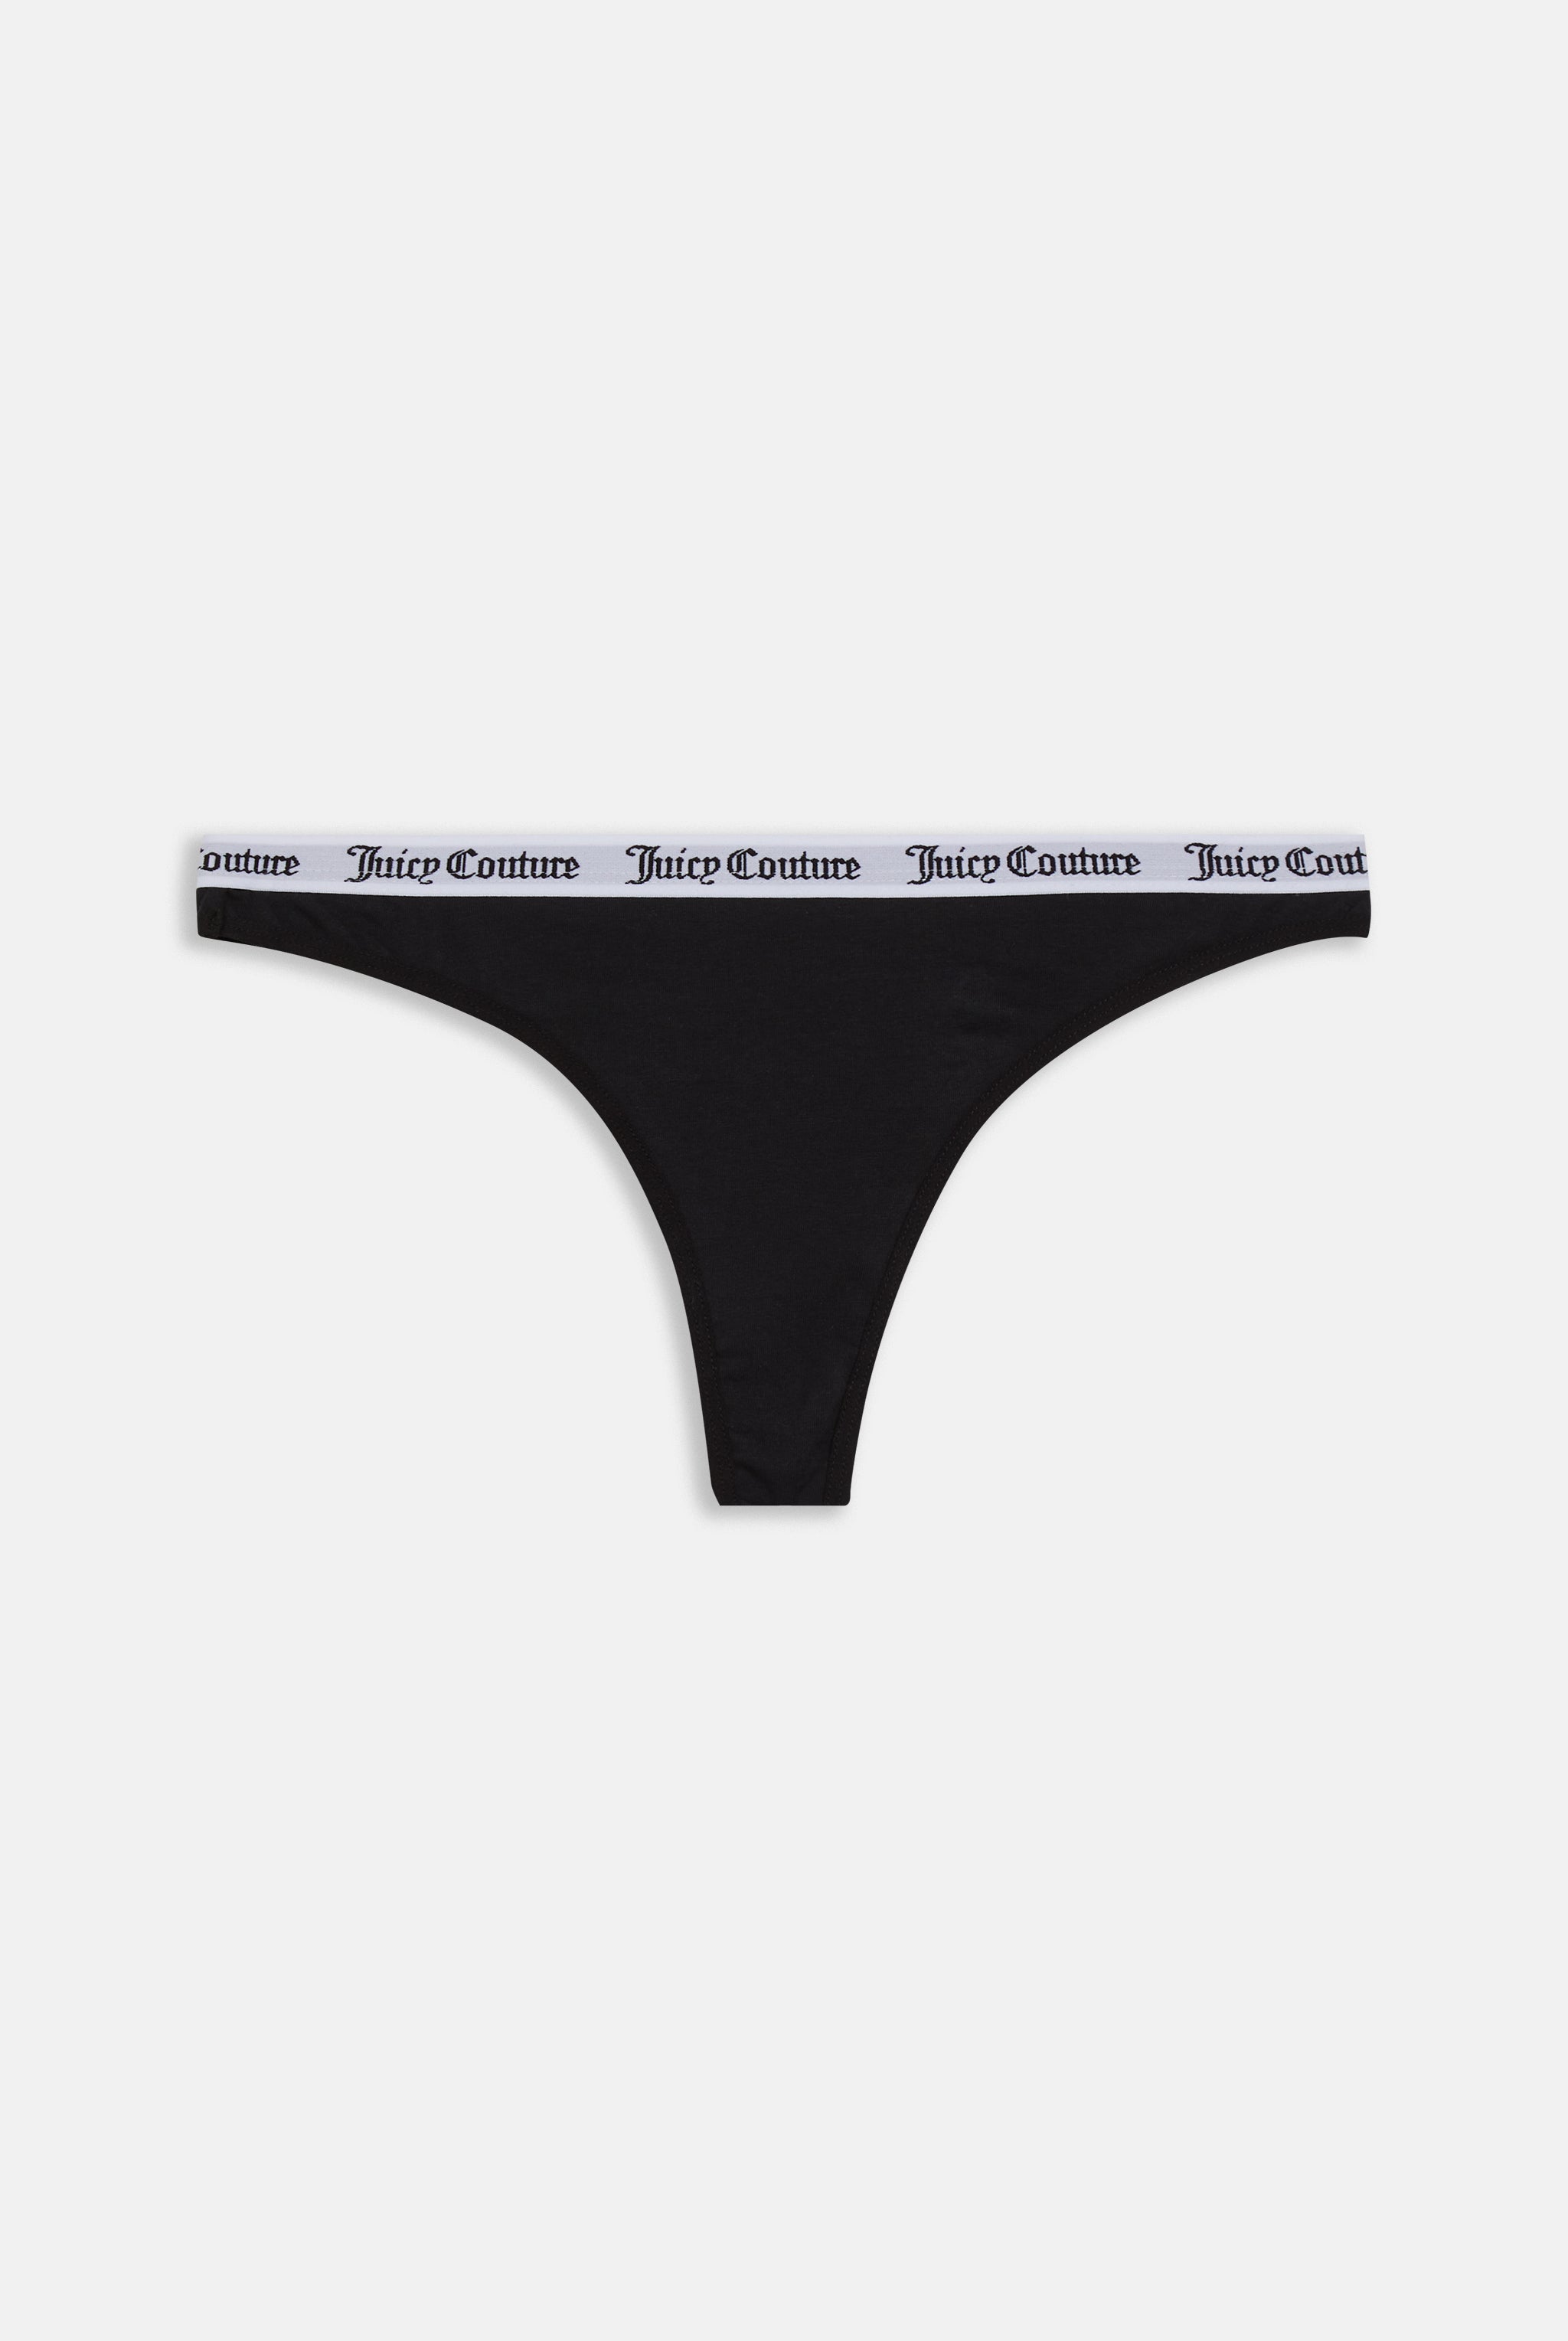 Black JUICY COUTURE Cotton Logo Thong - JD Sports Global